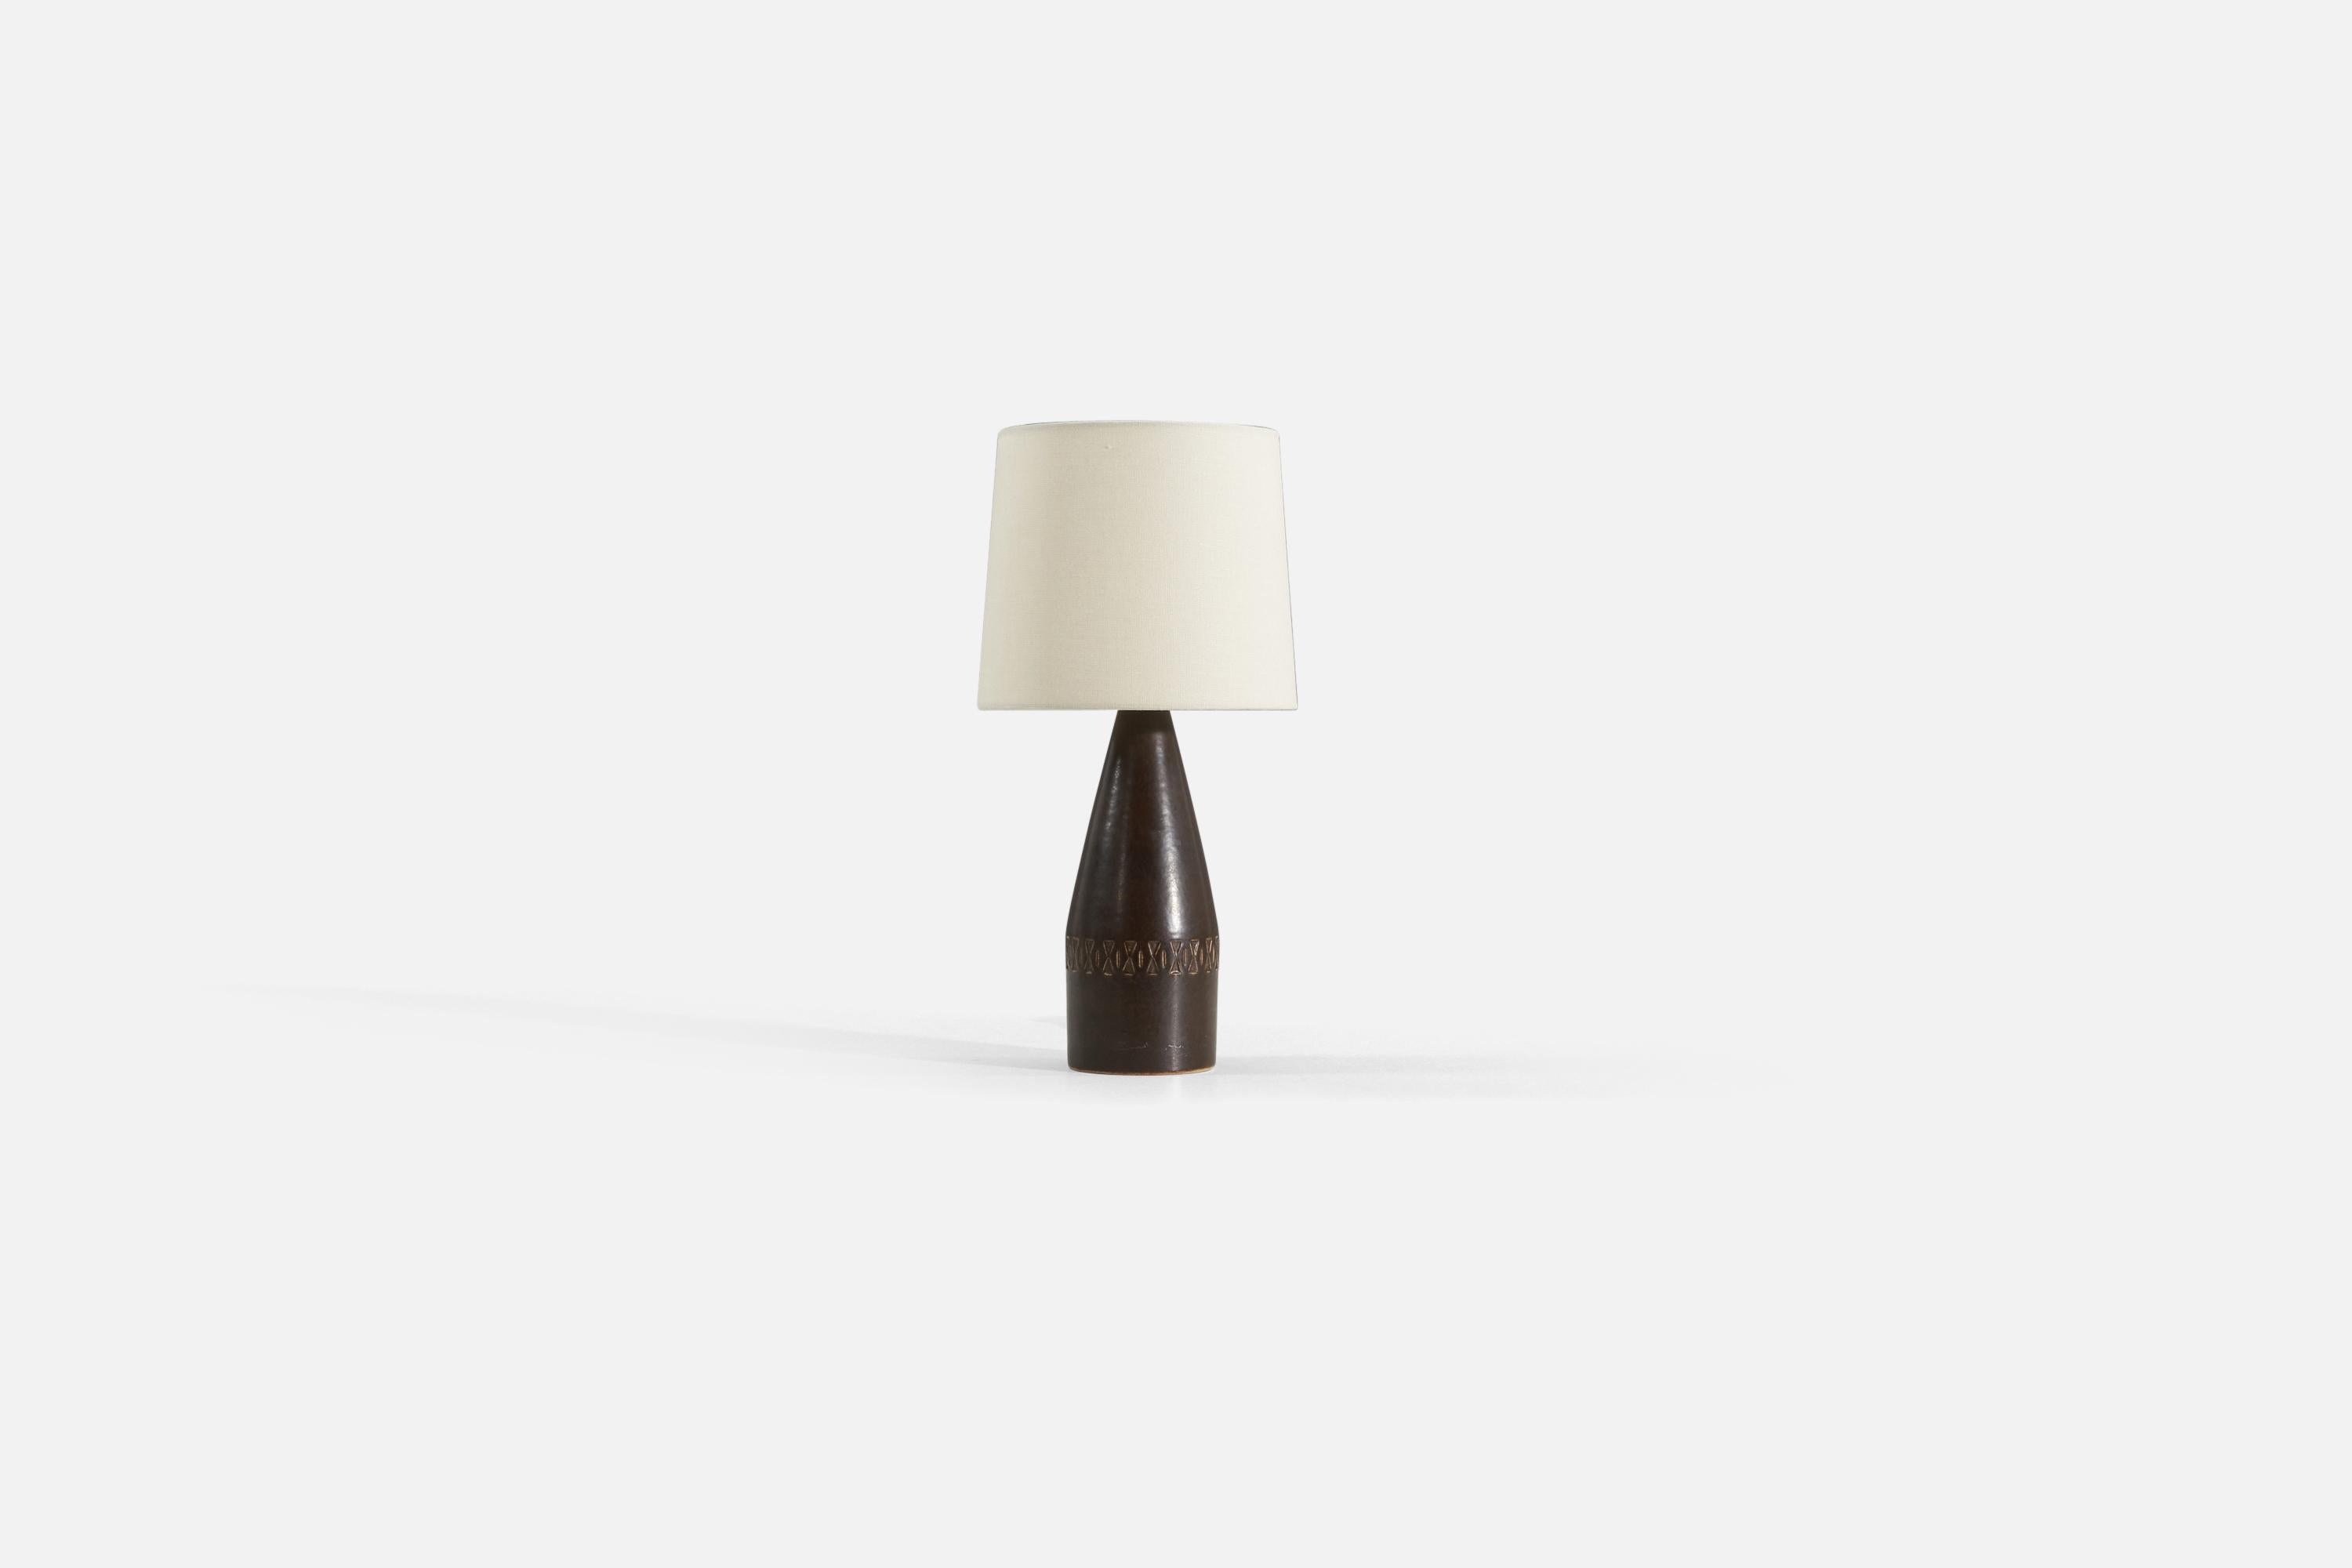 A brown-glazed stoneware table lamp produced by Michael Andersen Keramik. Underside marked and labeled

Sold without lampshade. 

Dimensions in listing exclude shade.
For reference:
Shade : 7 x 8 x 7
Lamp with shade : 16.25 x 8 x 8.
 